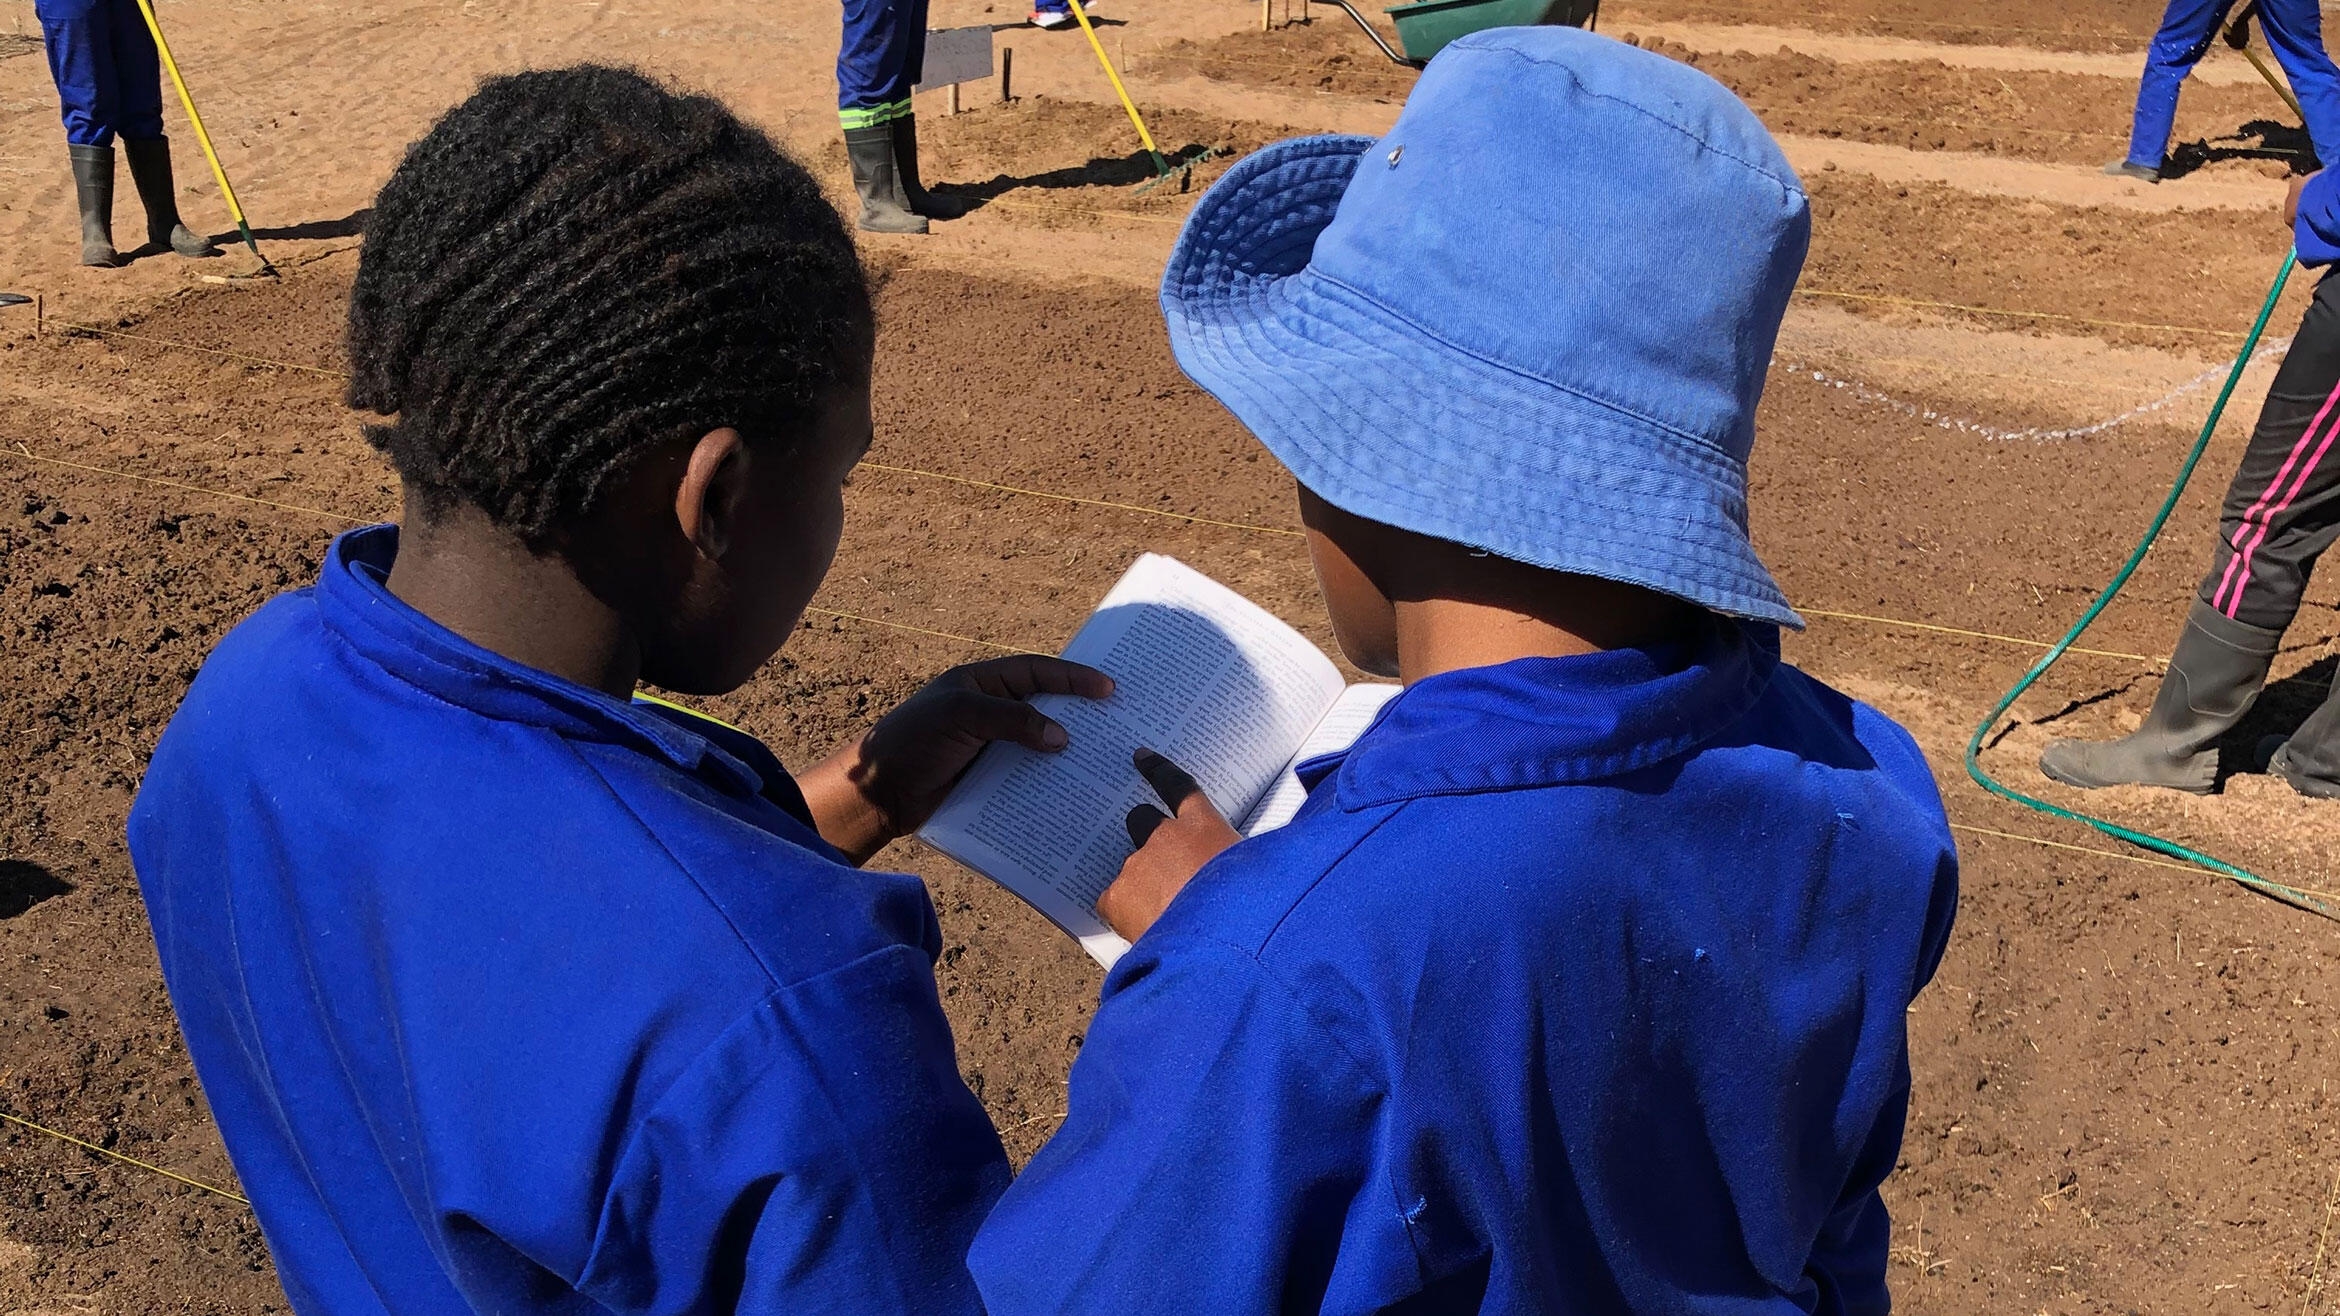 two Namibian trainees in work clothes read a book or brochure together